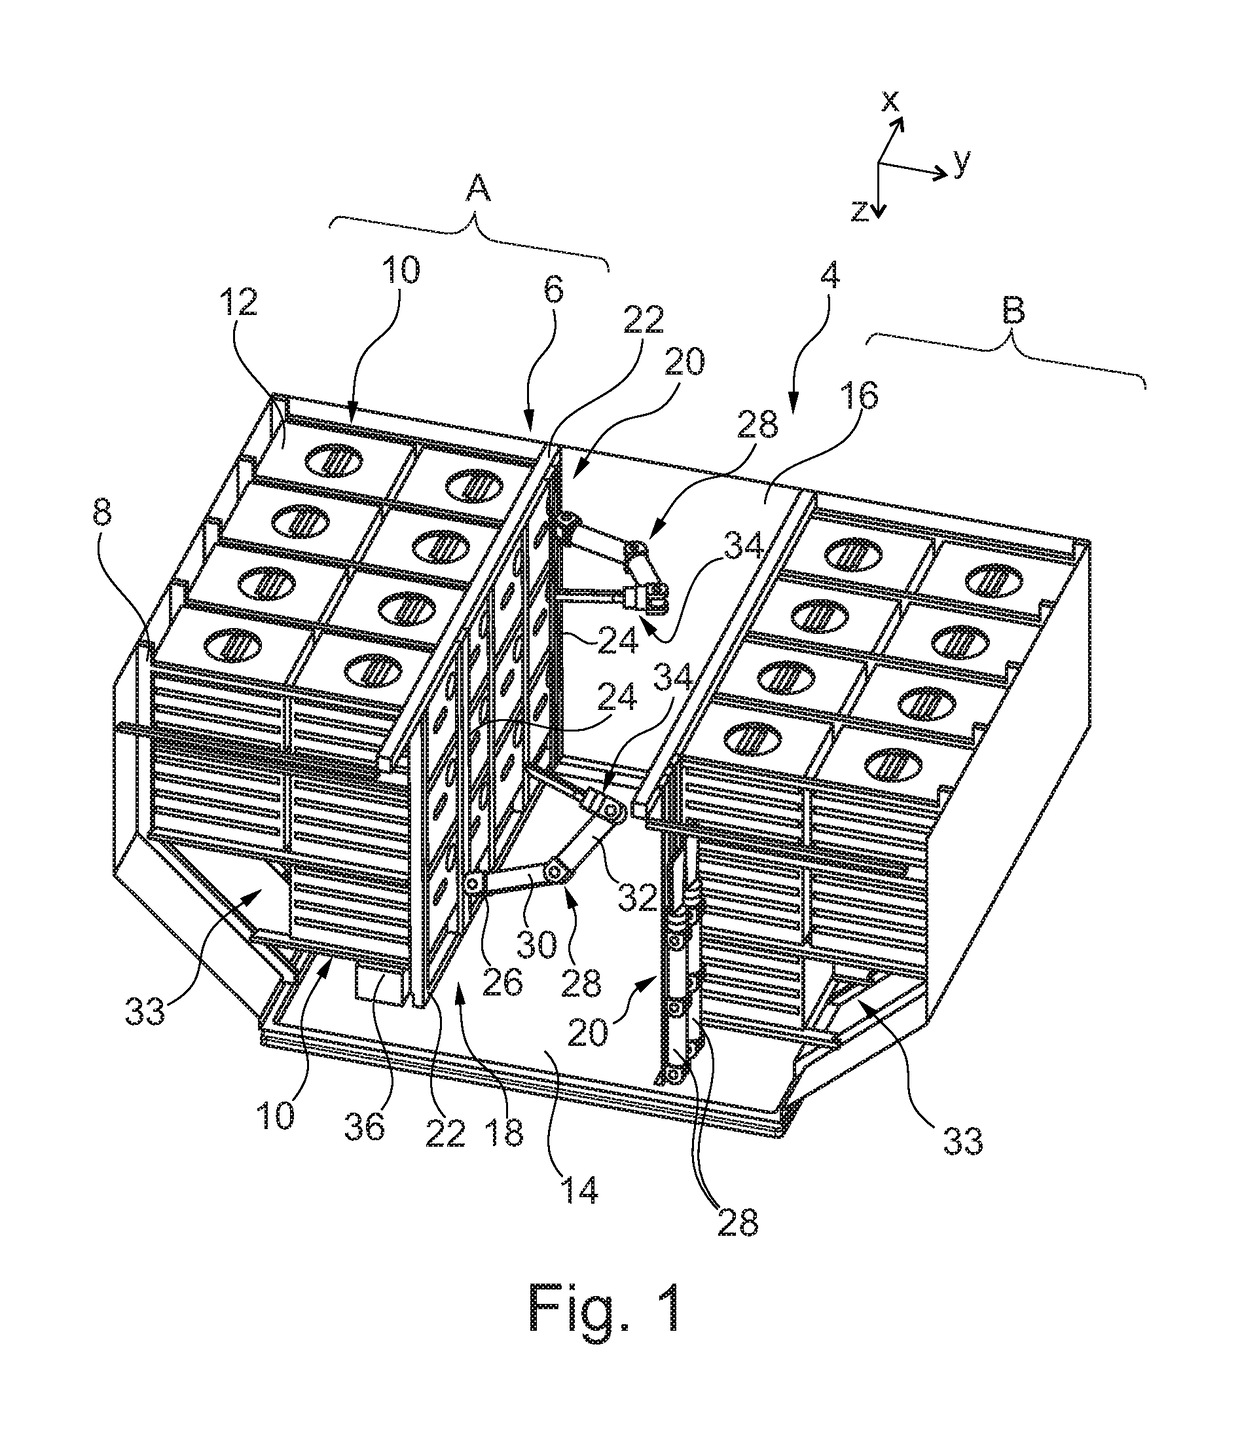 System for handling containers and other objects in a freight compartment of a vehicle